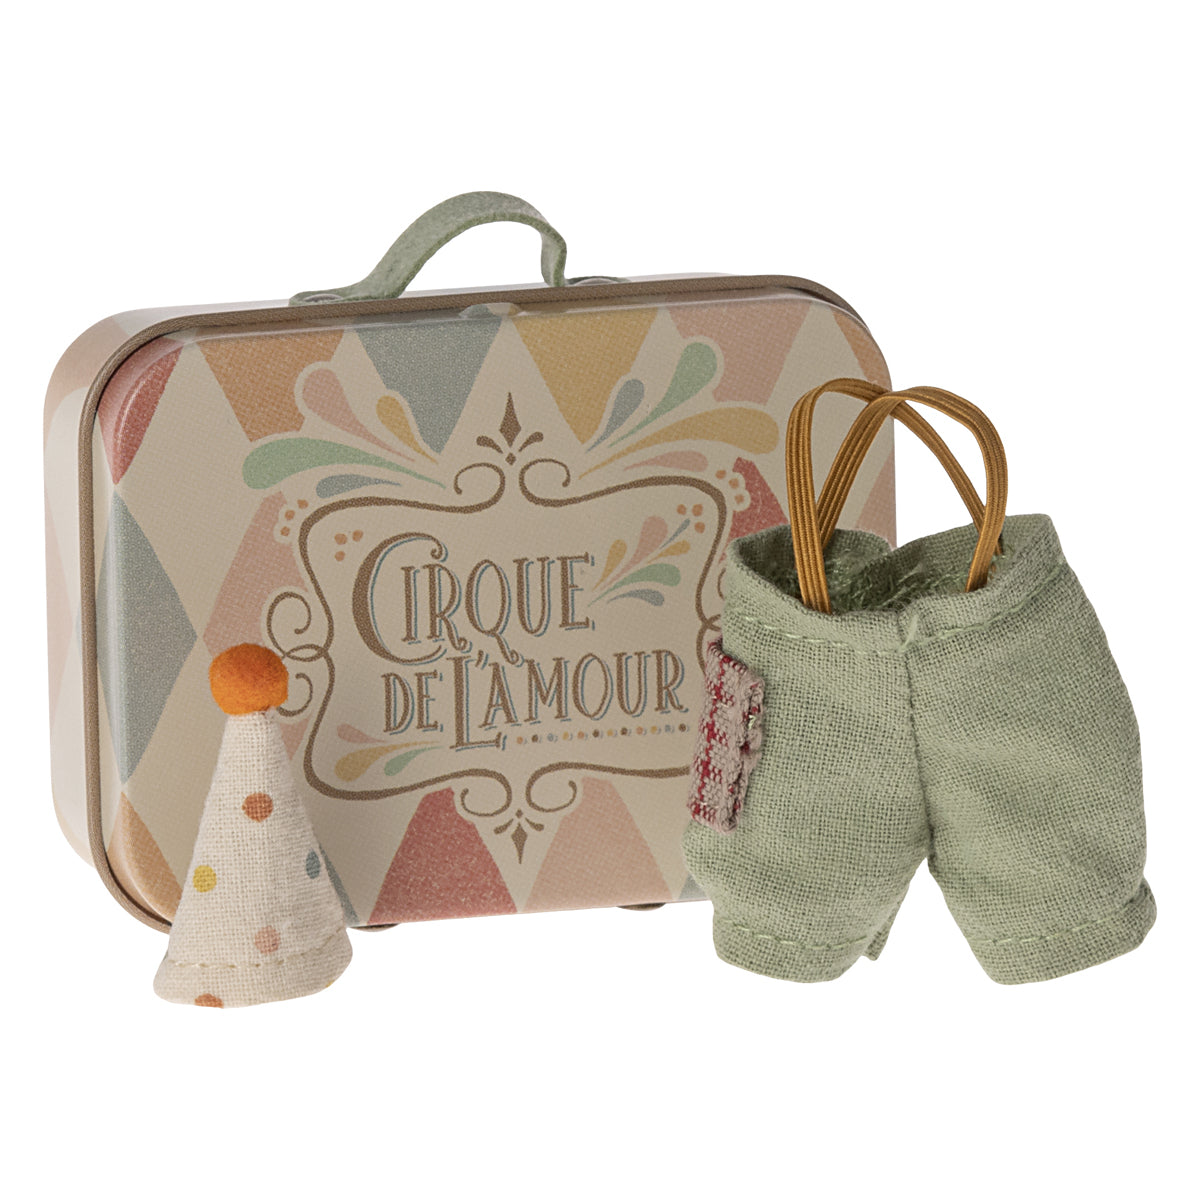 NEW Maileg Mouse Circus Clothes In A Suitcase - Little Brother